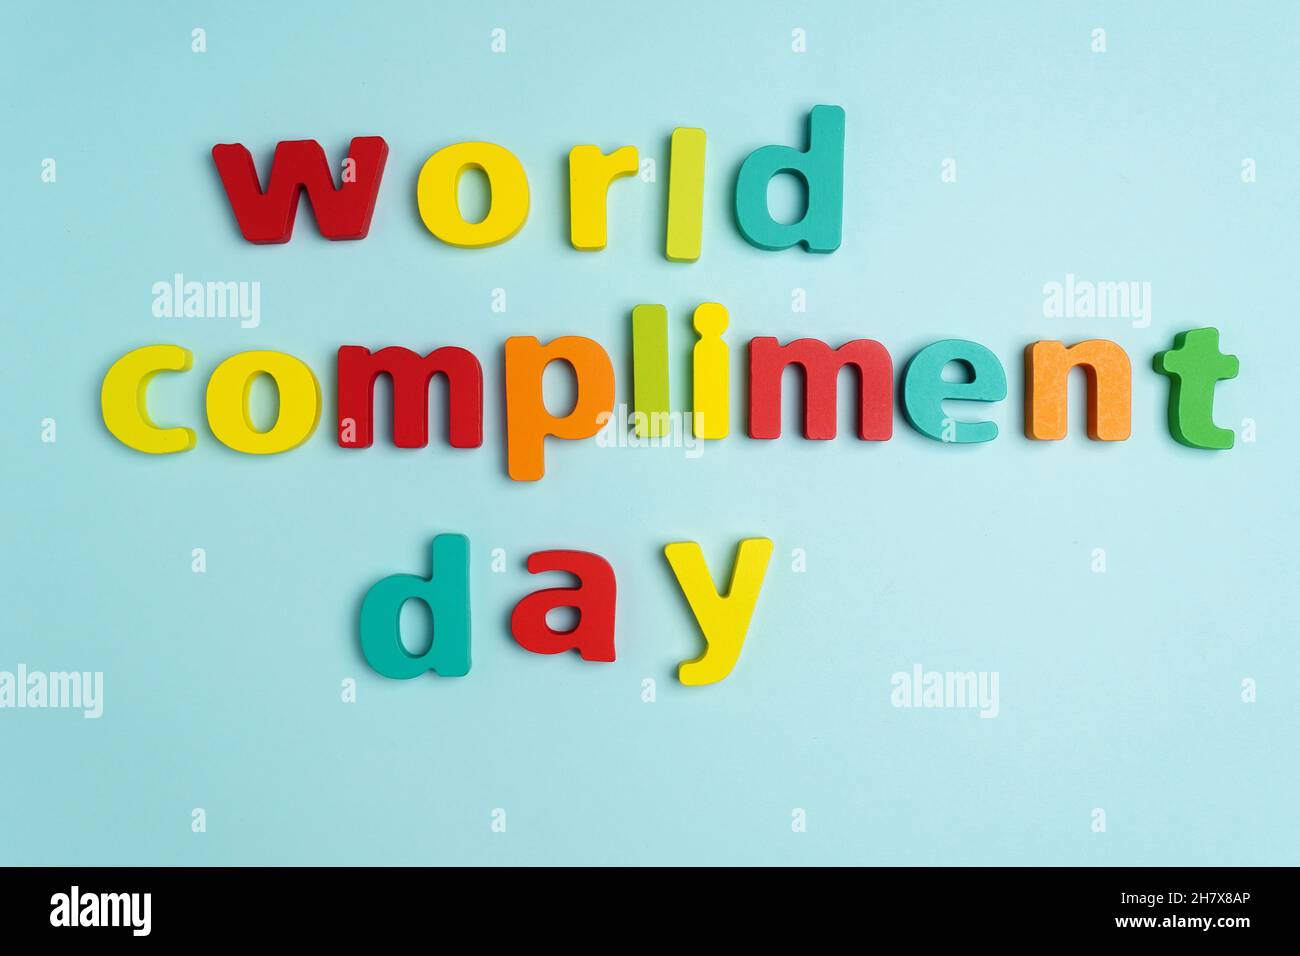 World compliment day, national compliment day 1 march. Top view Stock Photo